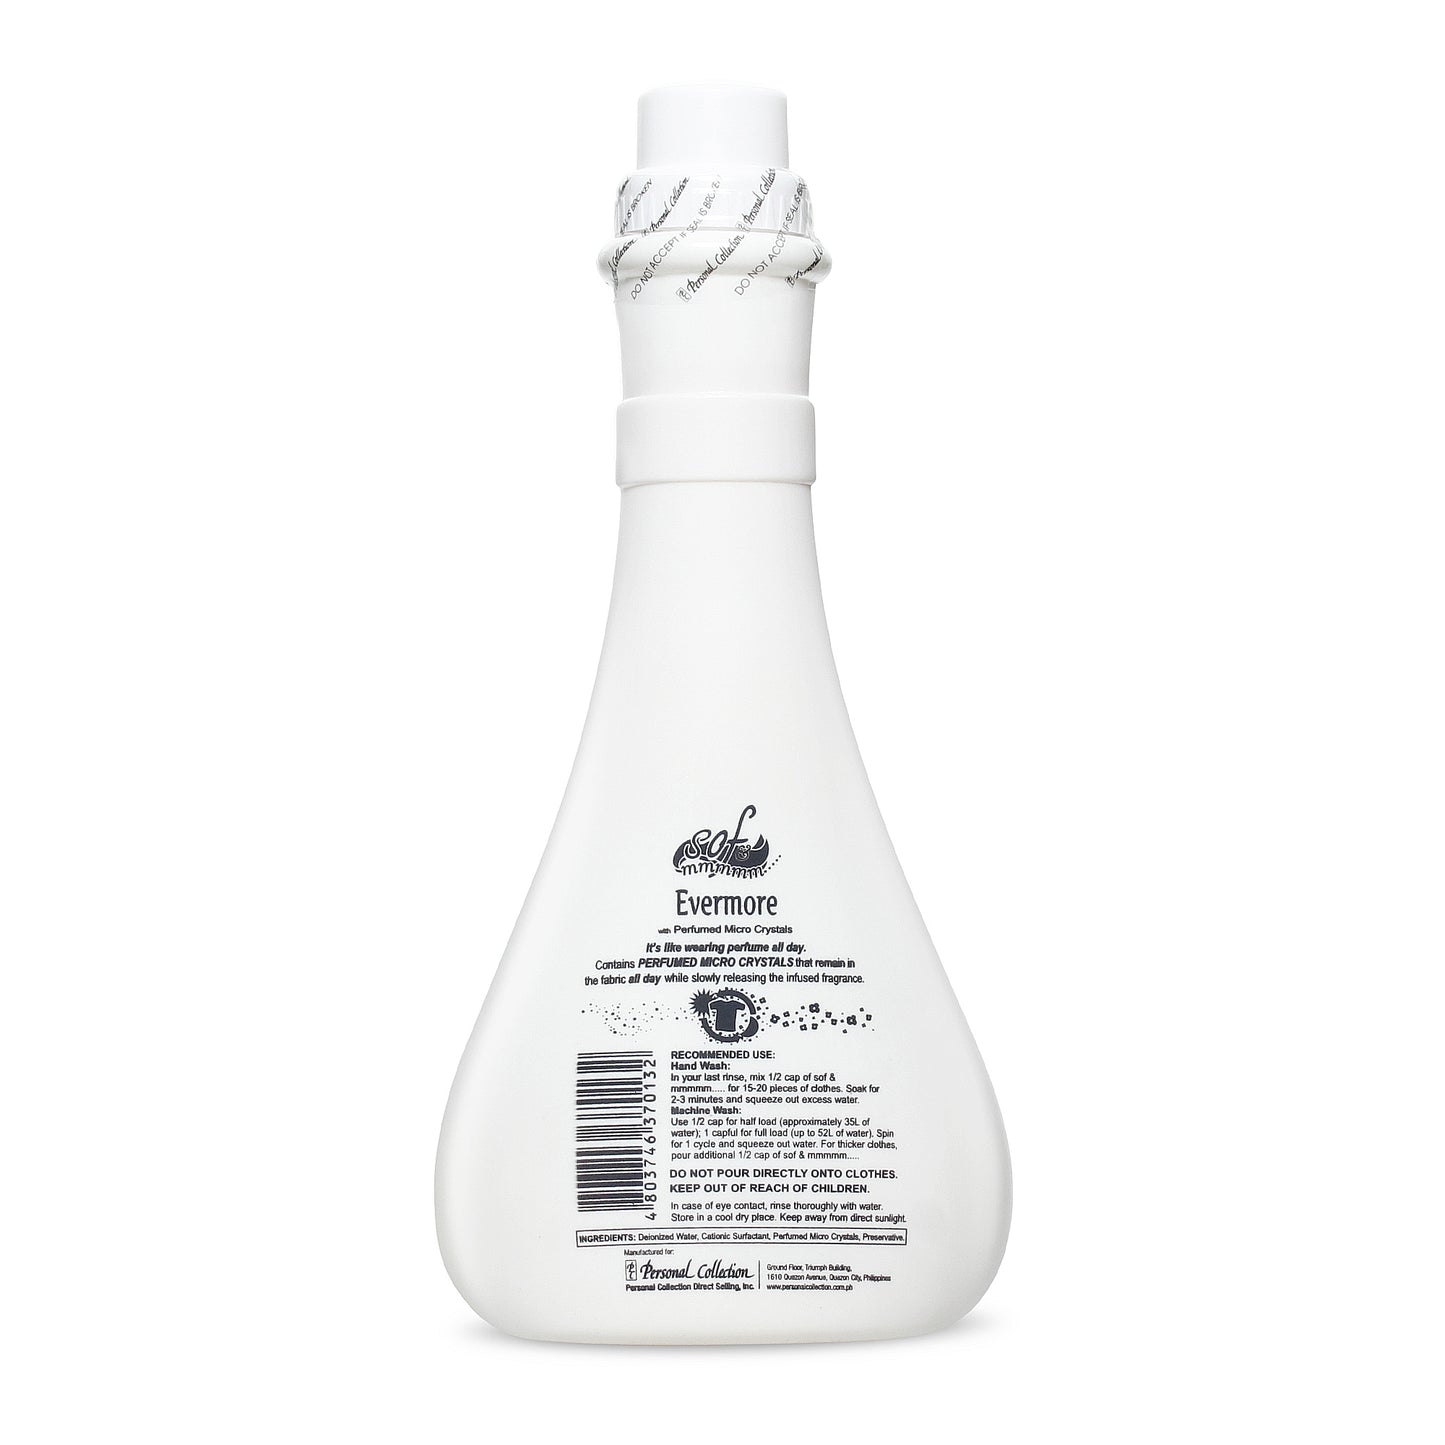 sof & mmmmm Evermore Concentrated Fabric Conditioner 1000 mL